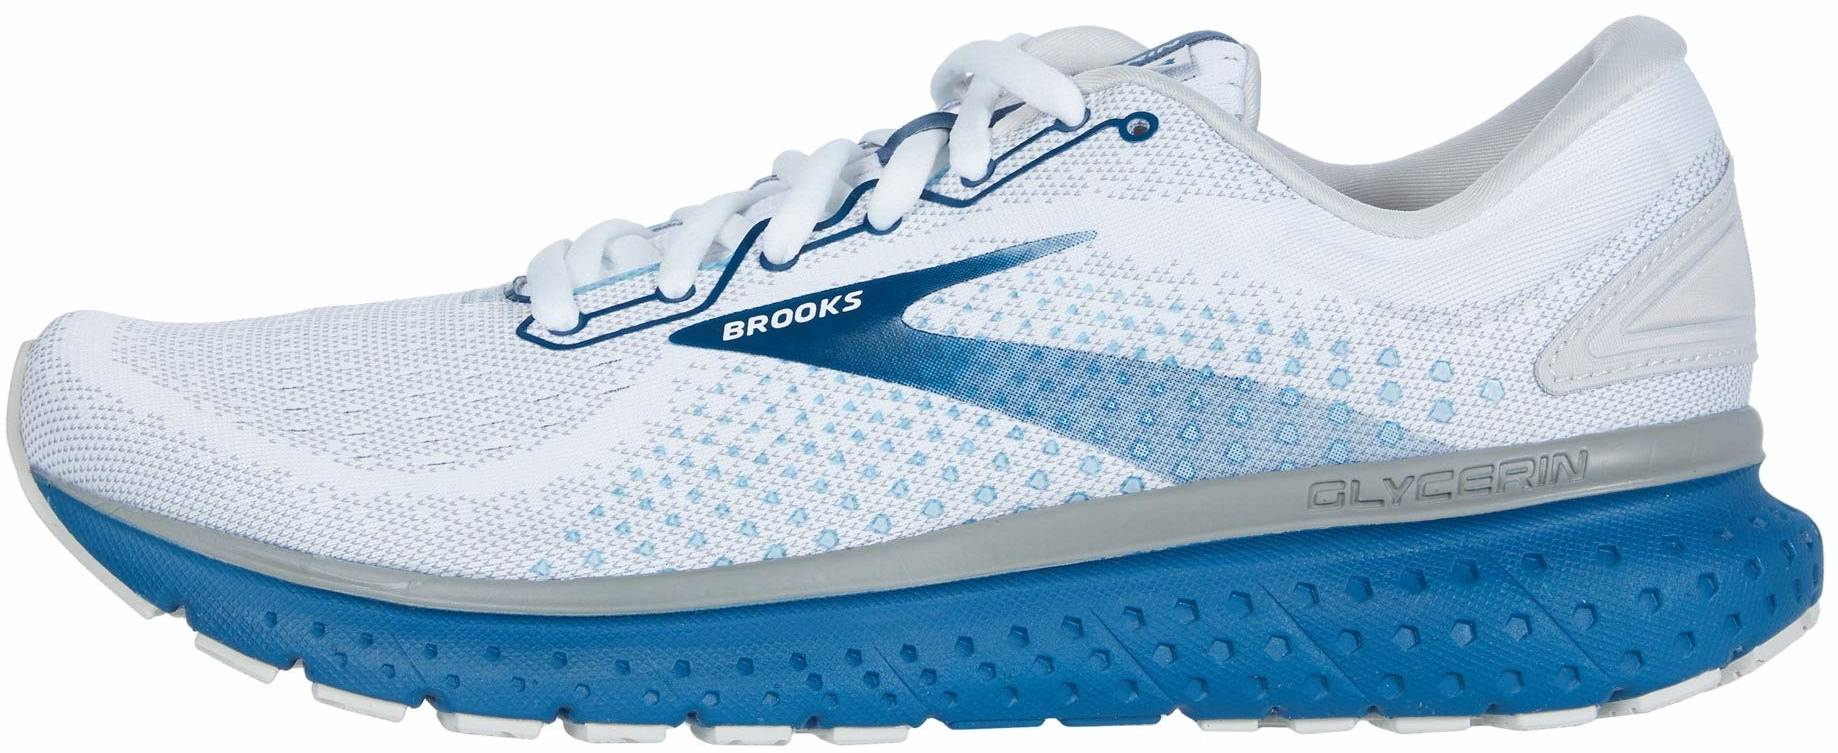 20+ White Brooks running shoes: Save up 